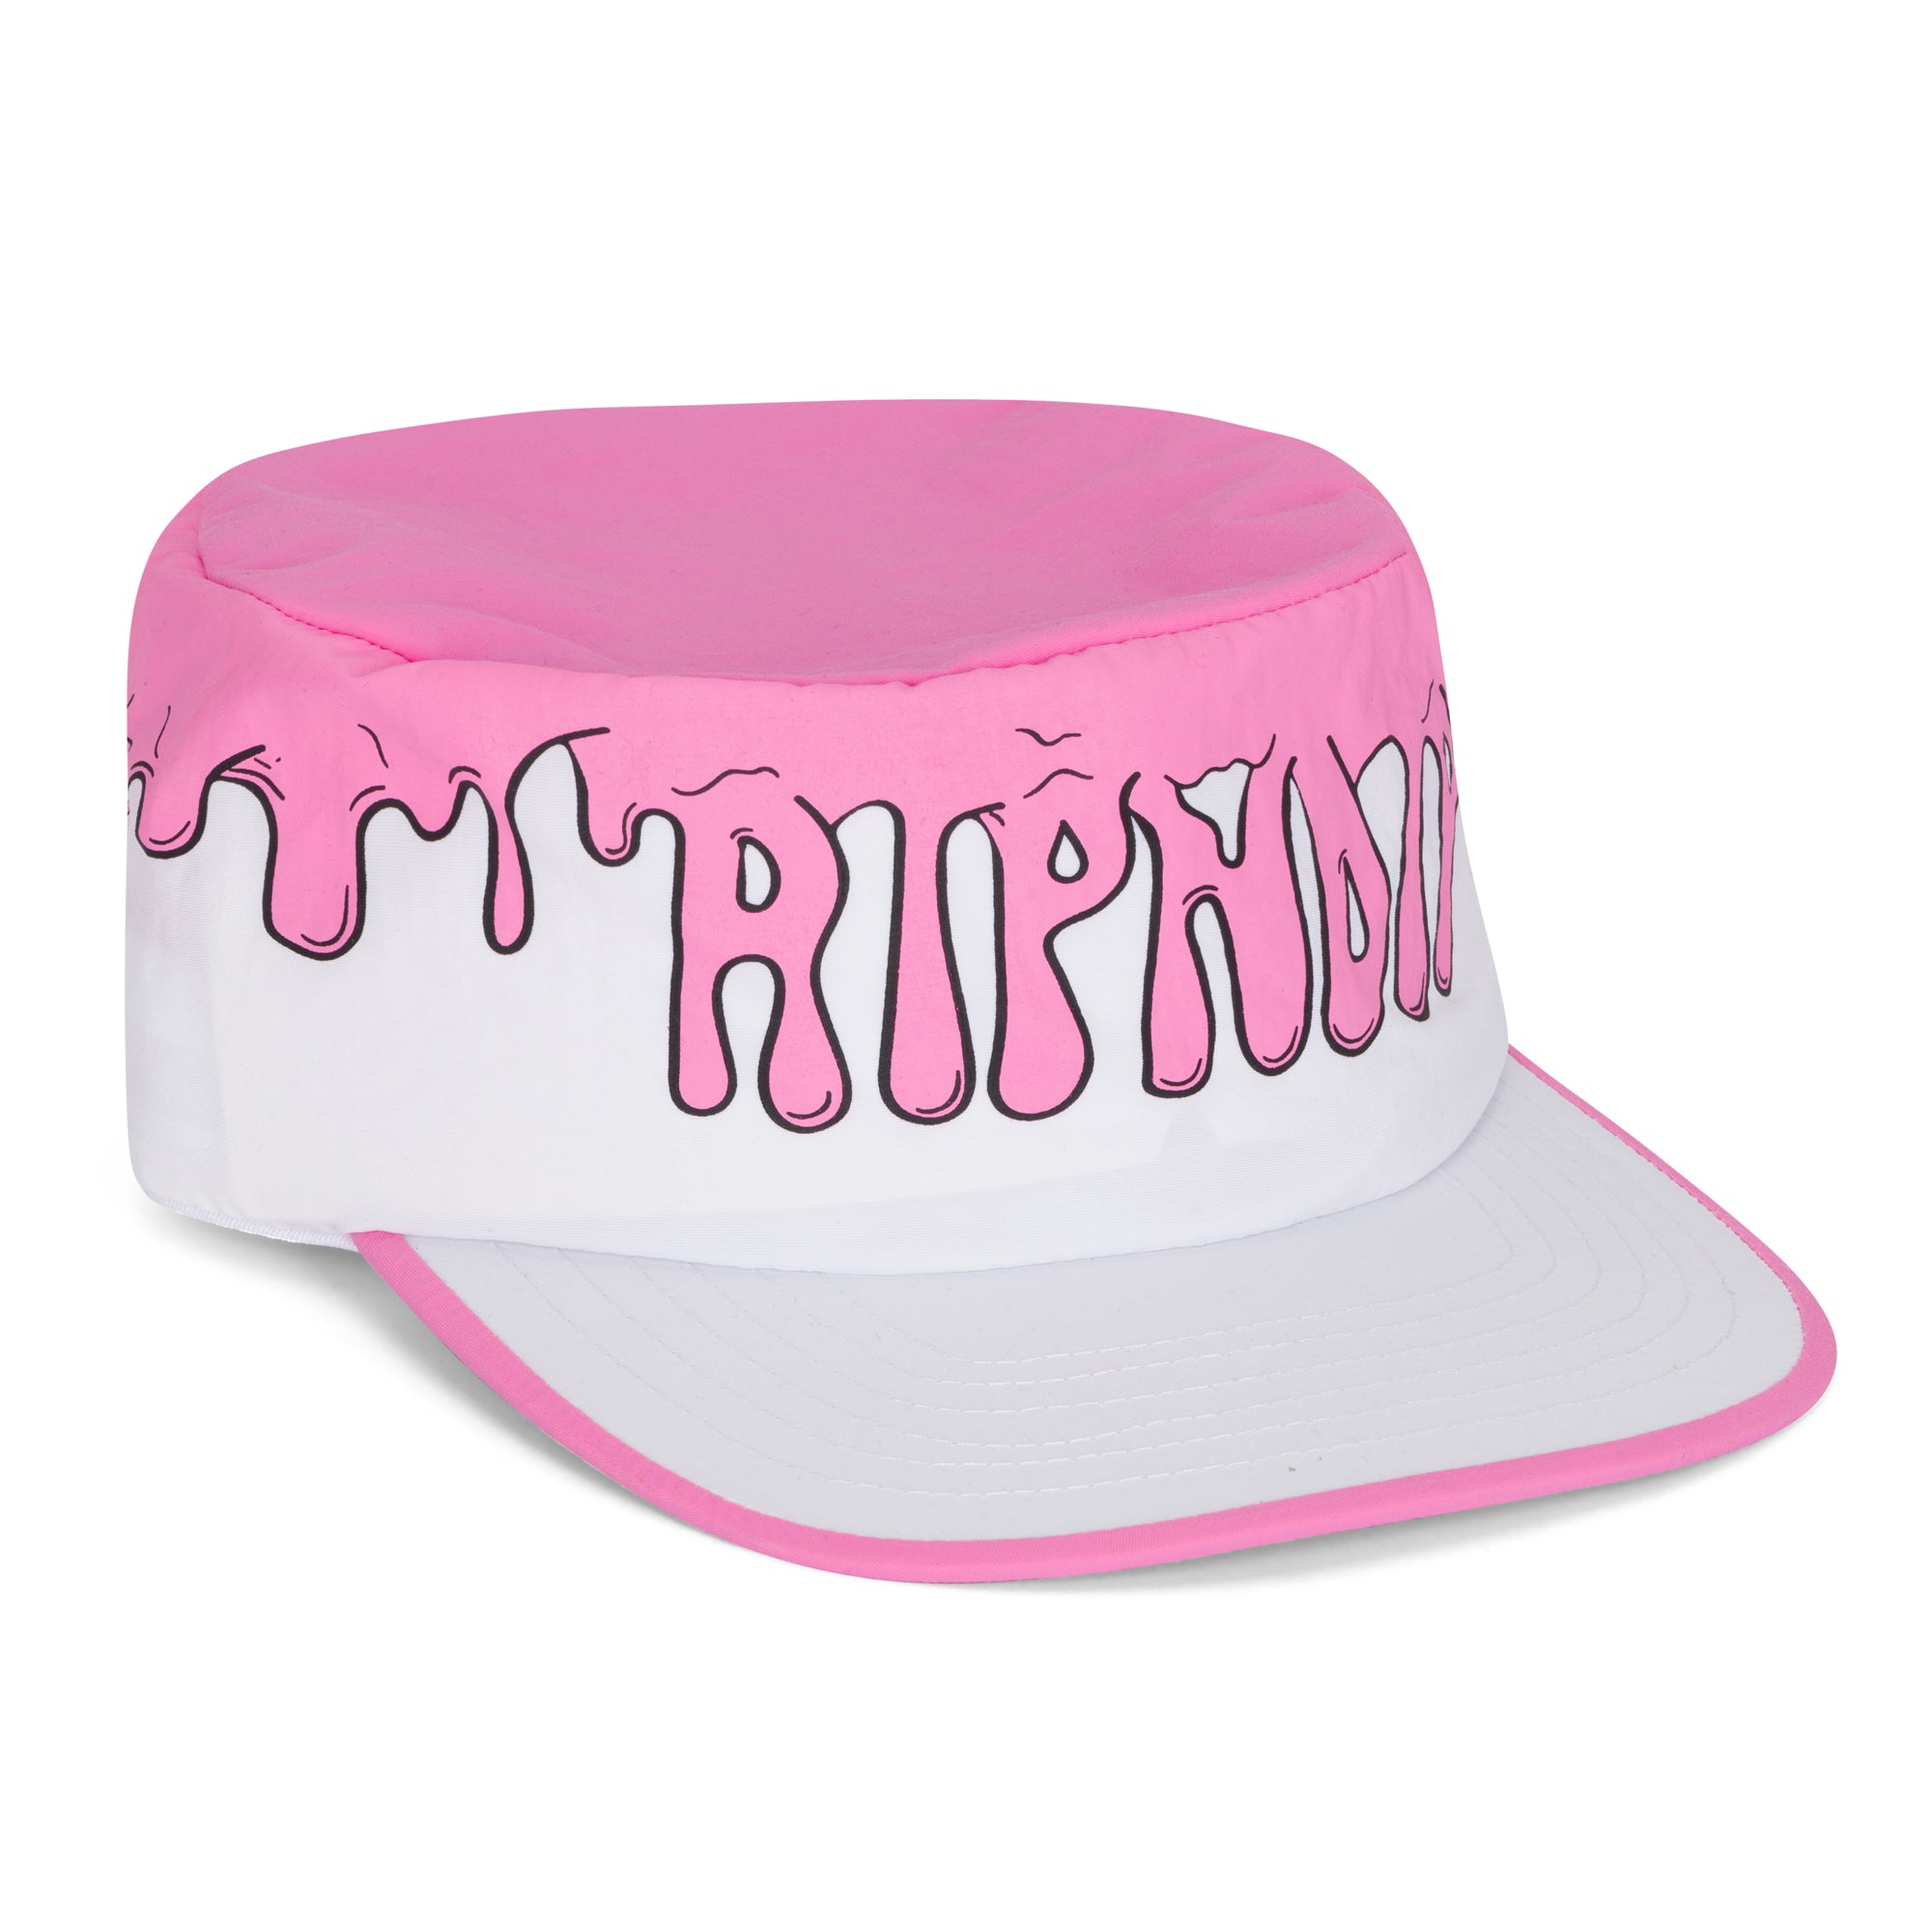 Drizzle Painters Hat (Pink / White)